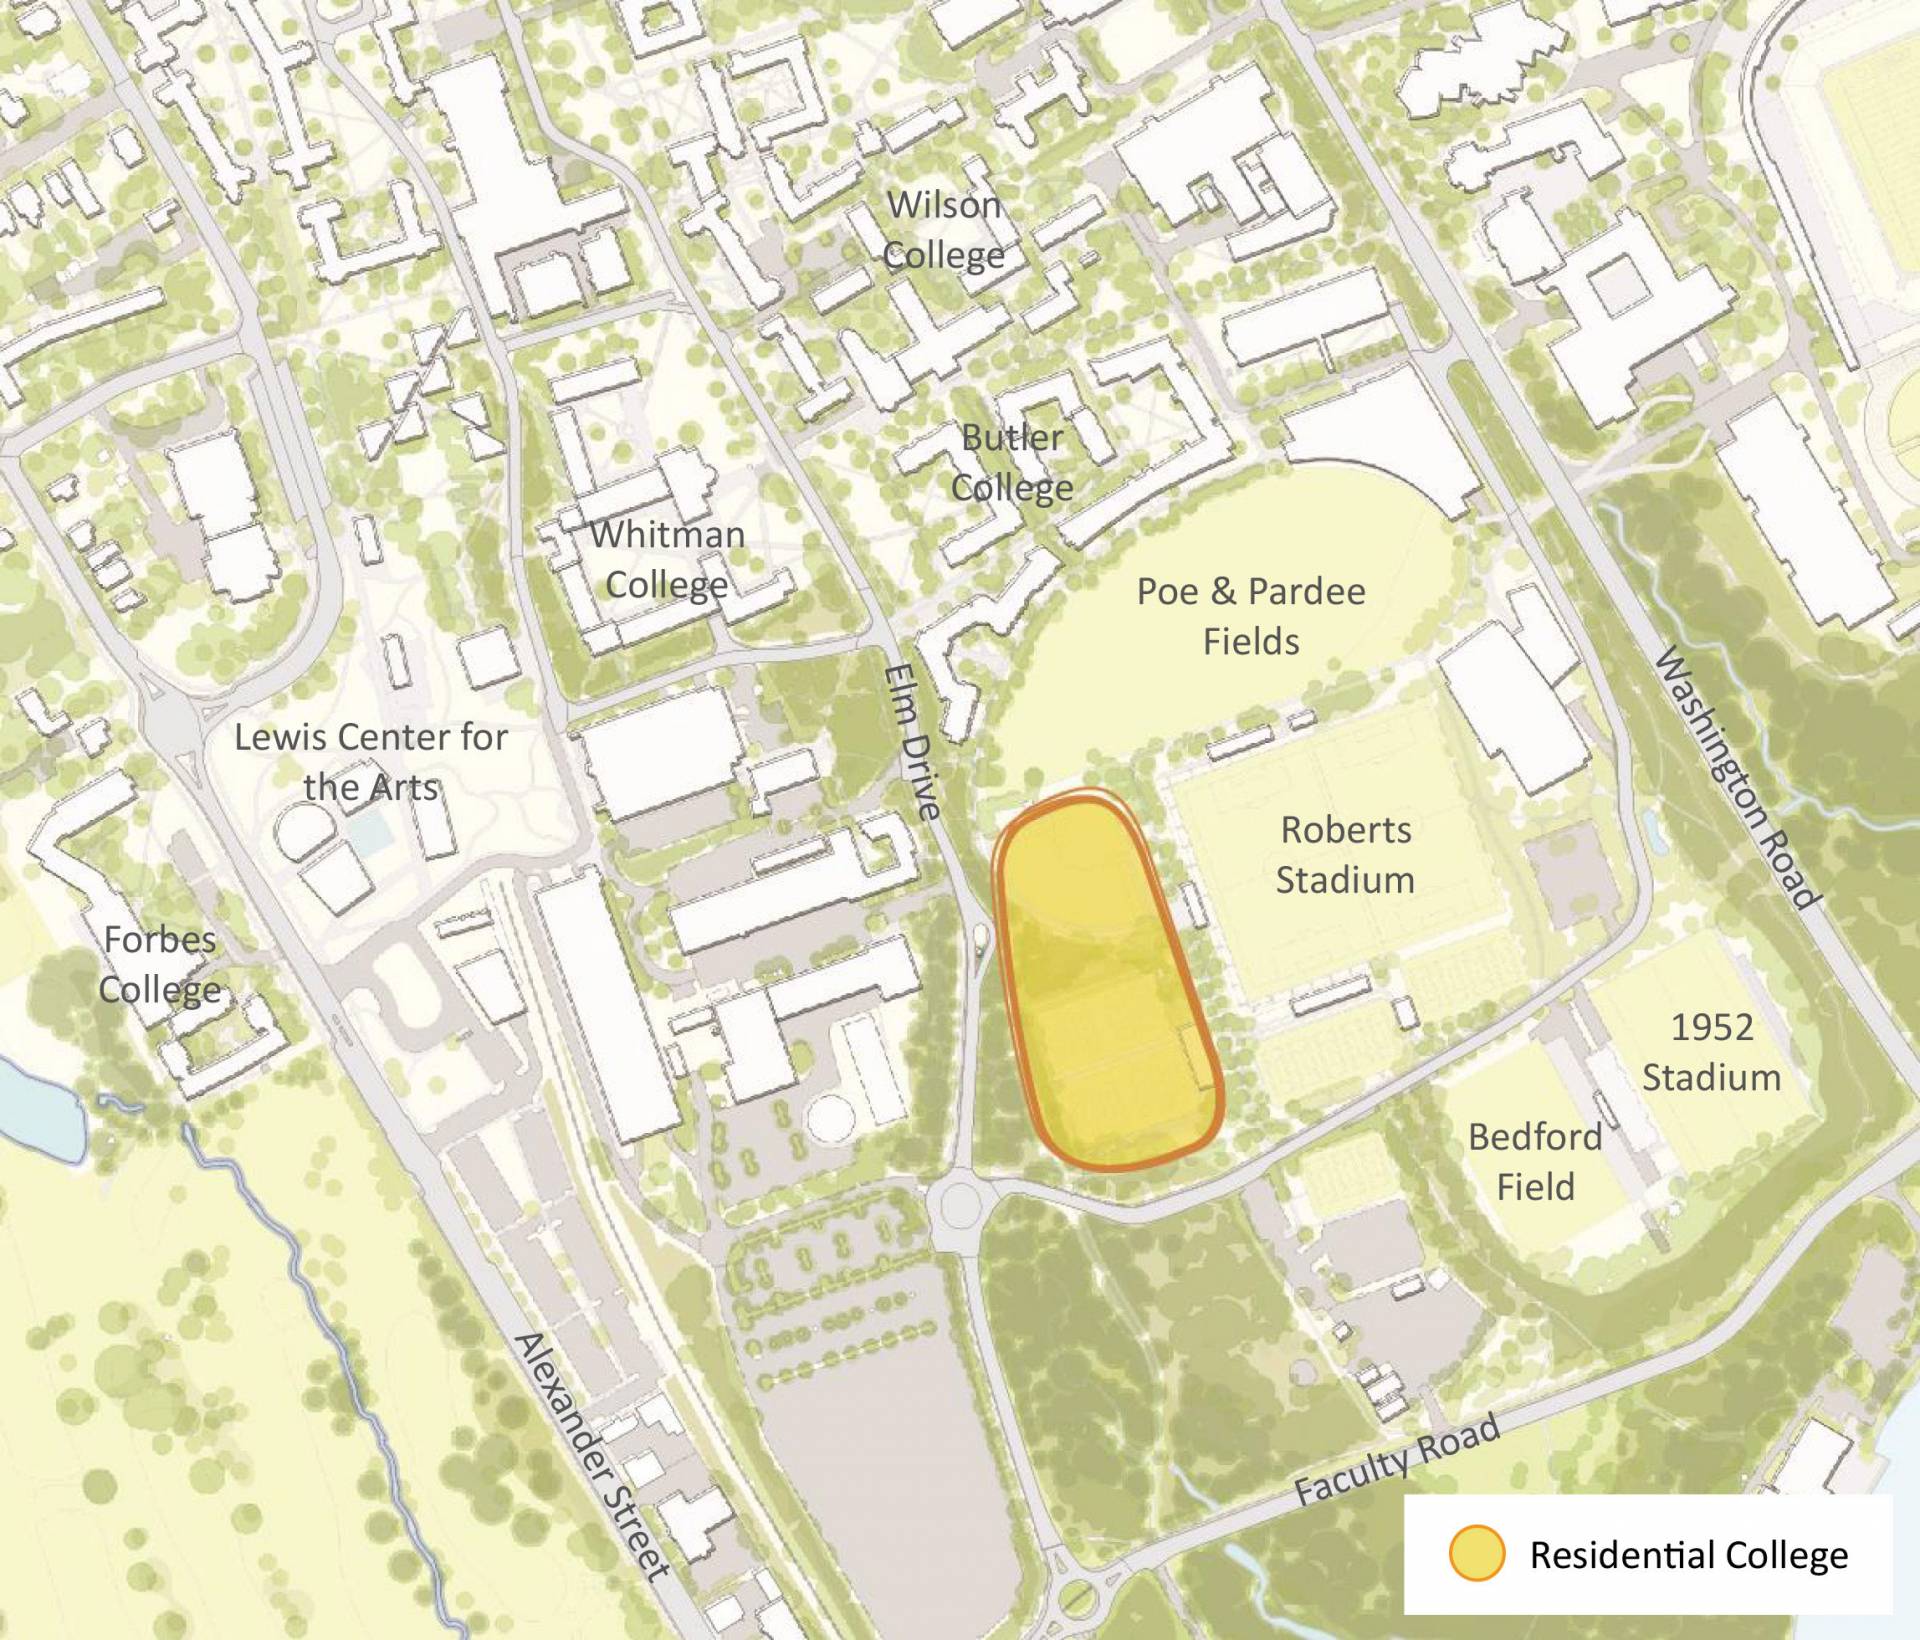 A map of the Princeton campus showing the potential site for a new residential college south of Poe Field and east of Elm Drive.